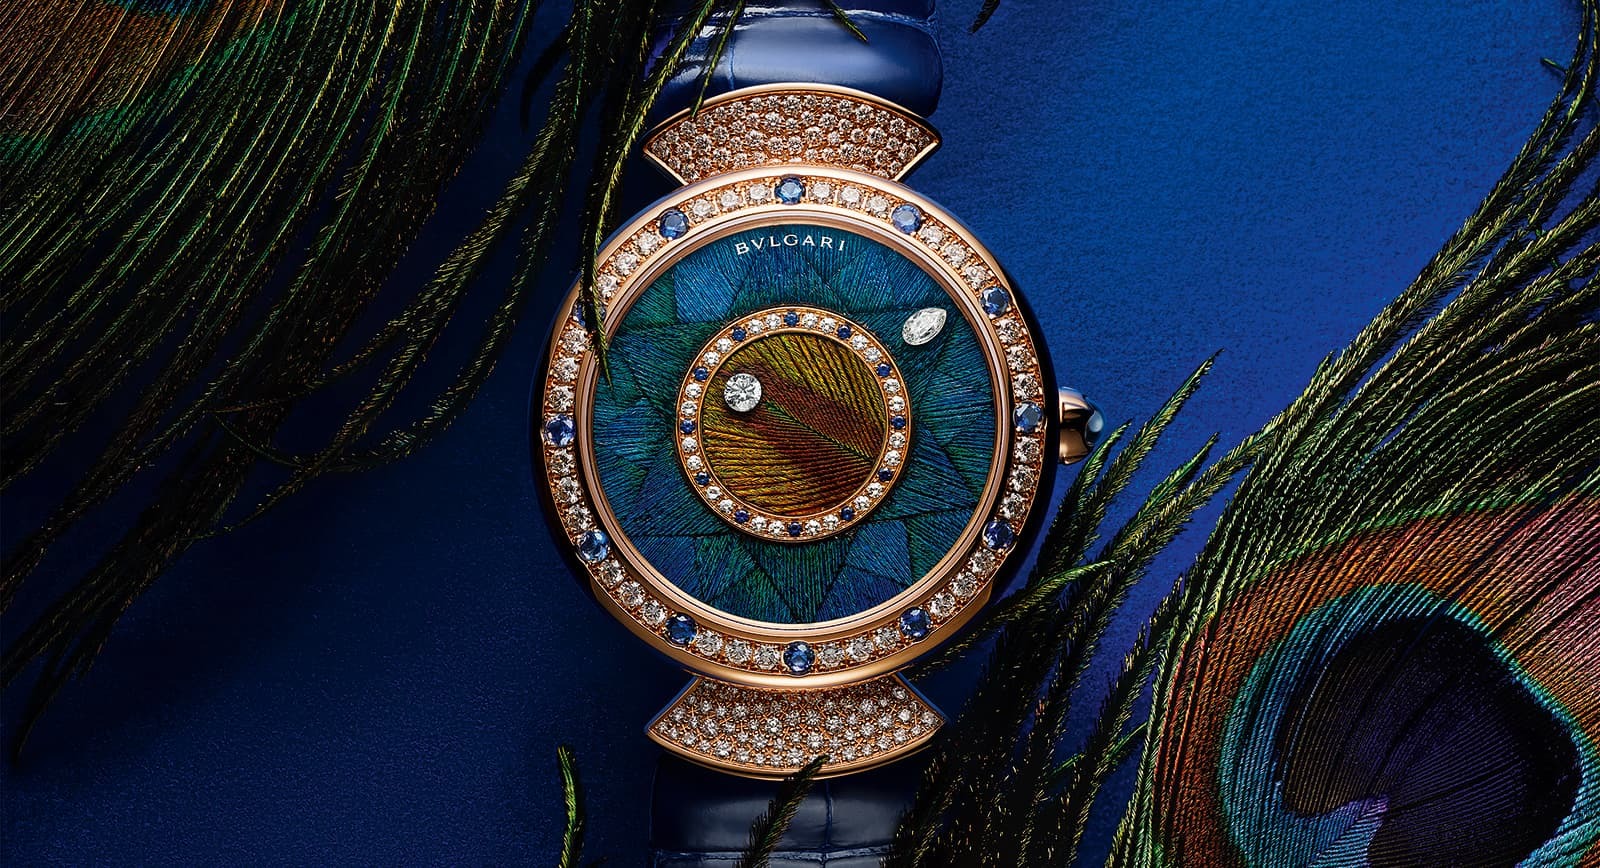 The Bulgari Diva’s Dream Peacock Dischi watch in 18k rose gold, brilliant-cut diamonds and natural peacock feather marquetry